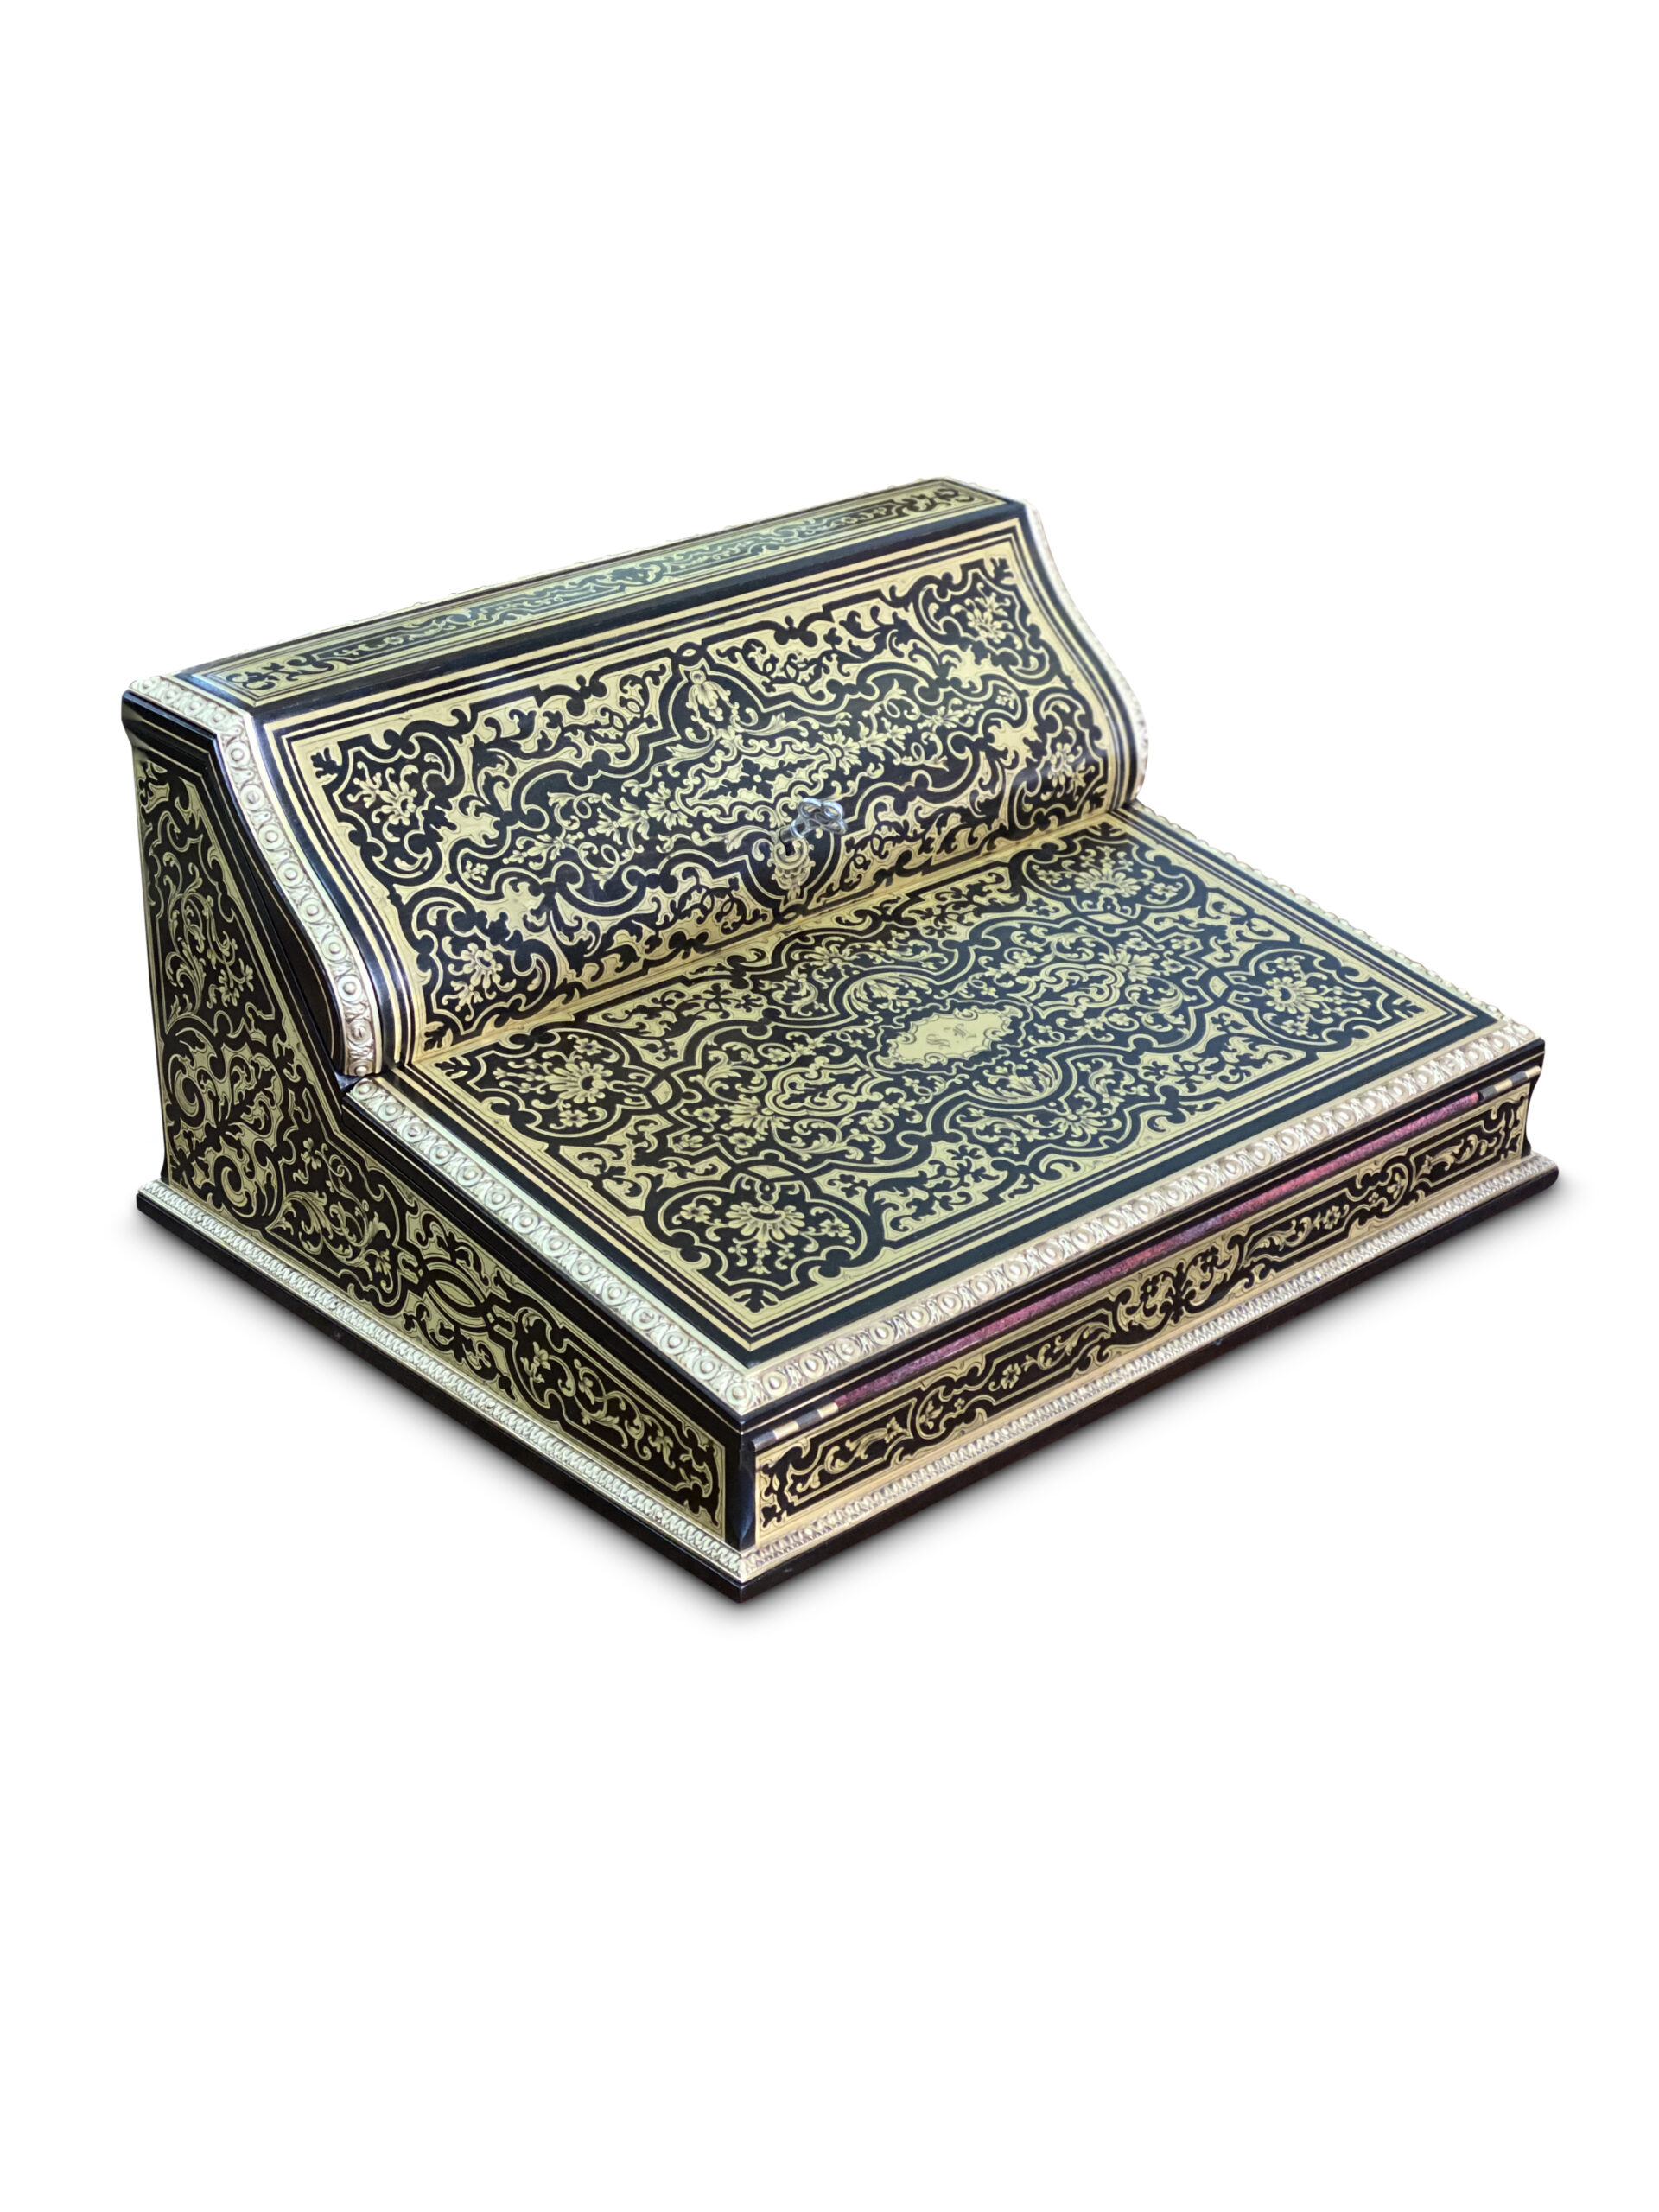 7733 19th century French Boulle work writing slope Tahan box5 scaled 1